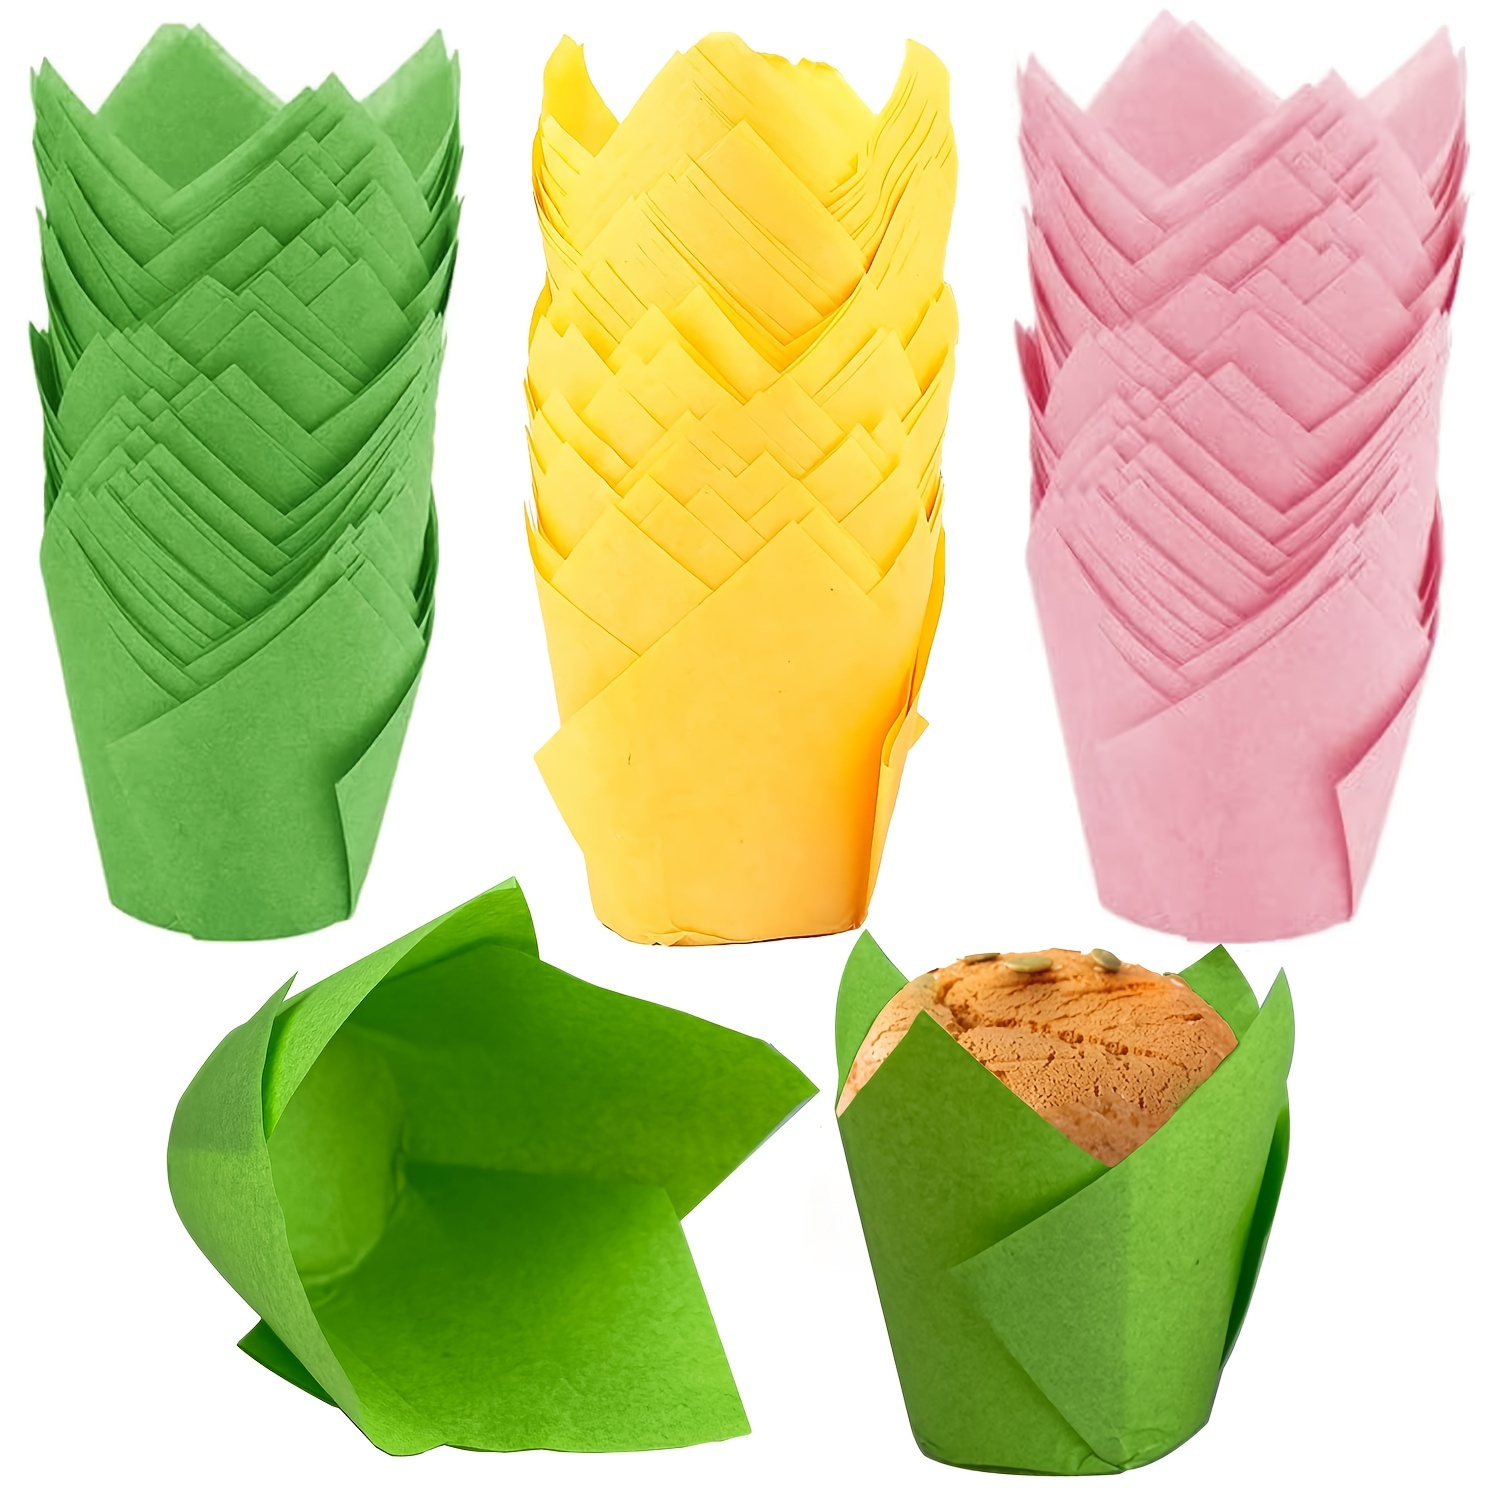 Katbite Baking Cups Cupcake Liners Muffin Liners 150PCS